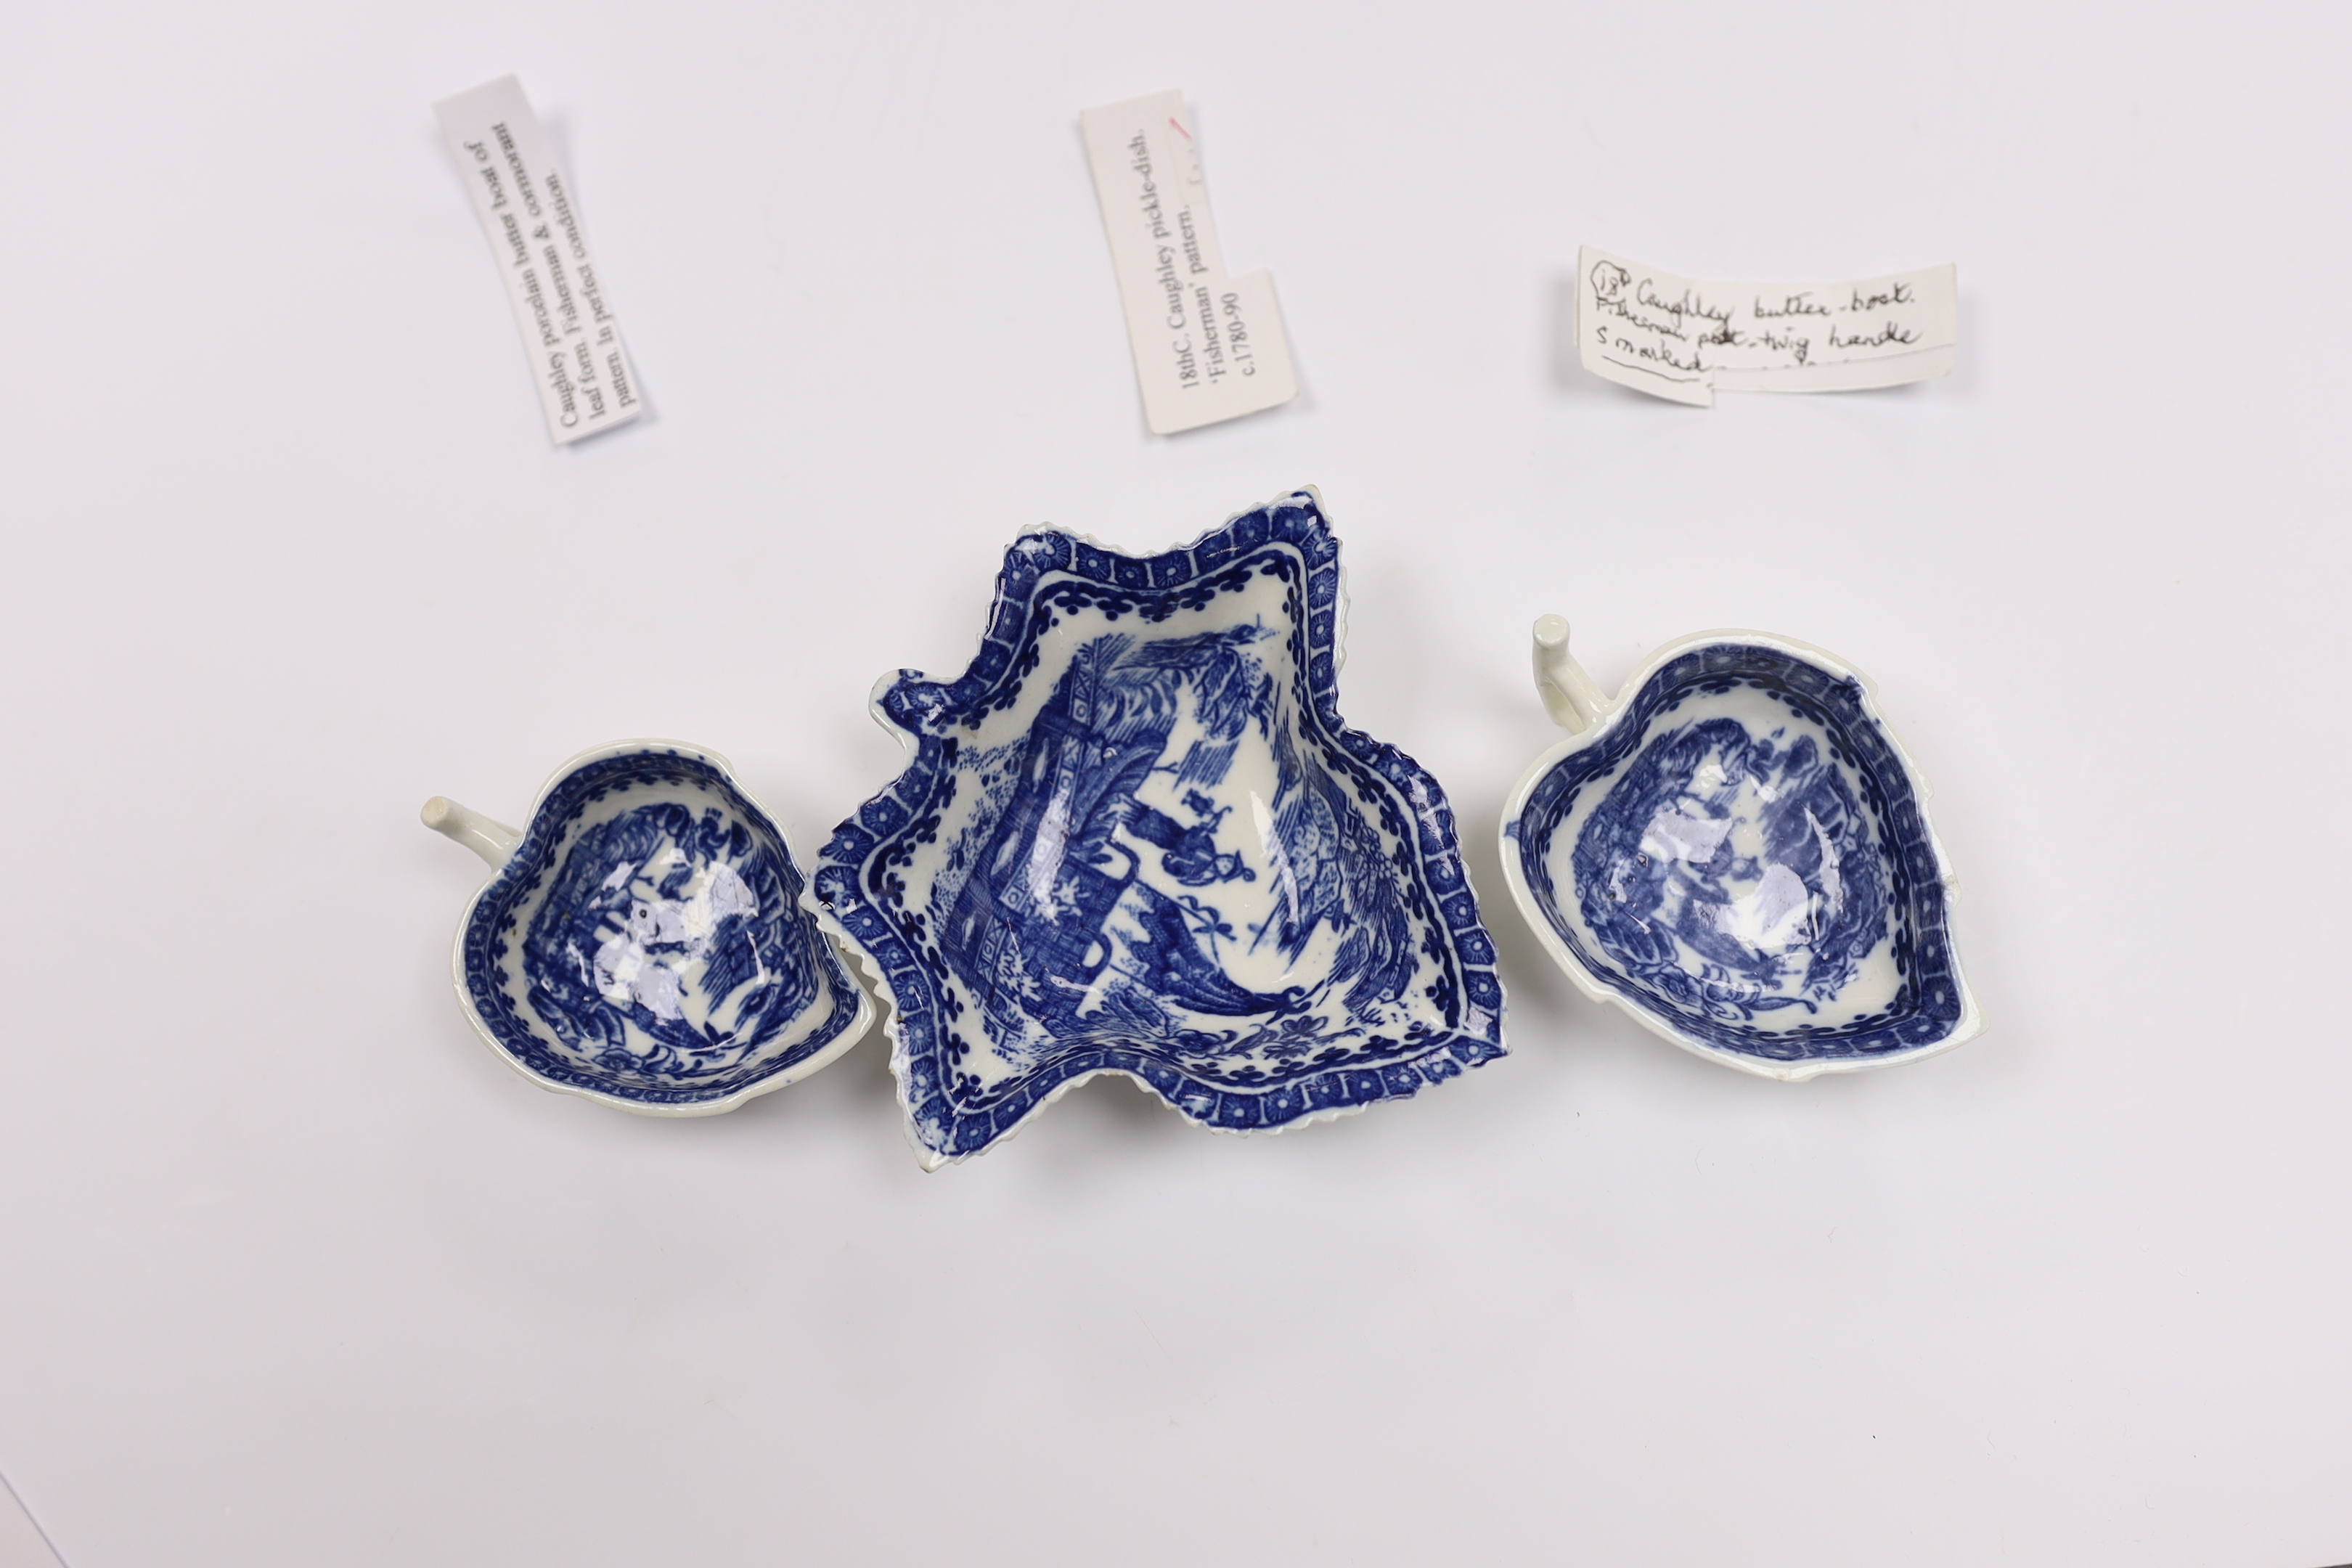 Caughley fisherman pattern - two butter boats and a pickle dish c.1780-90